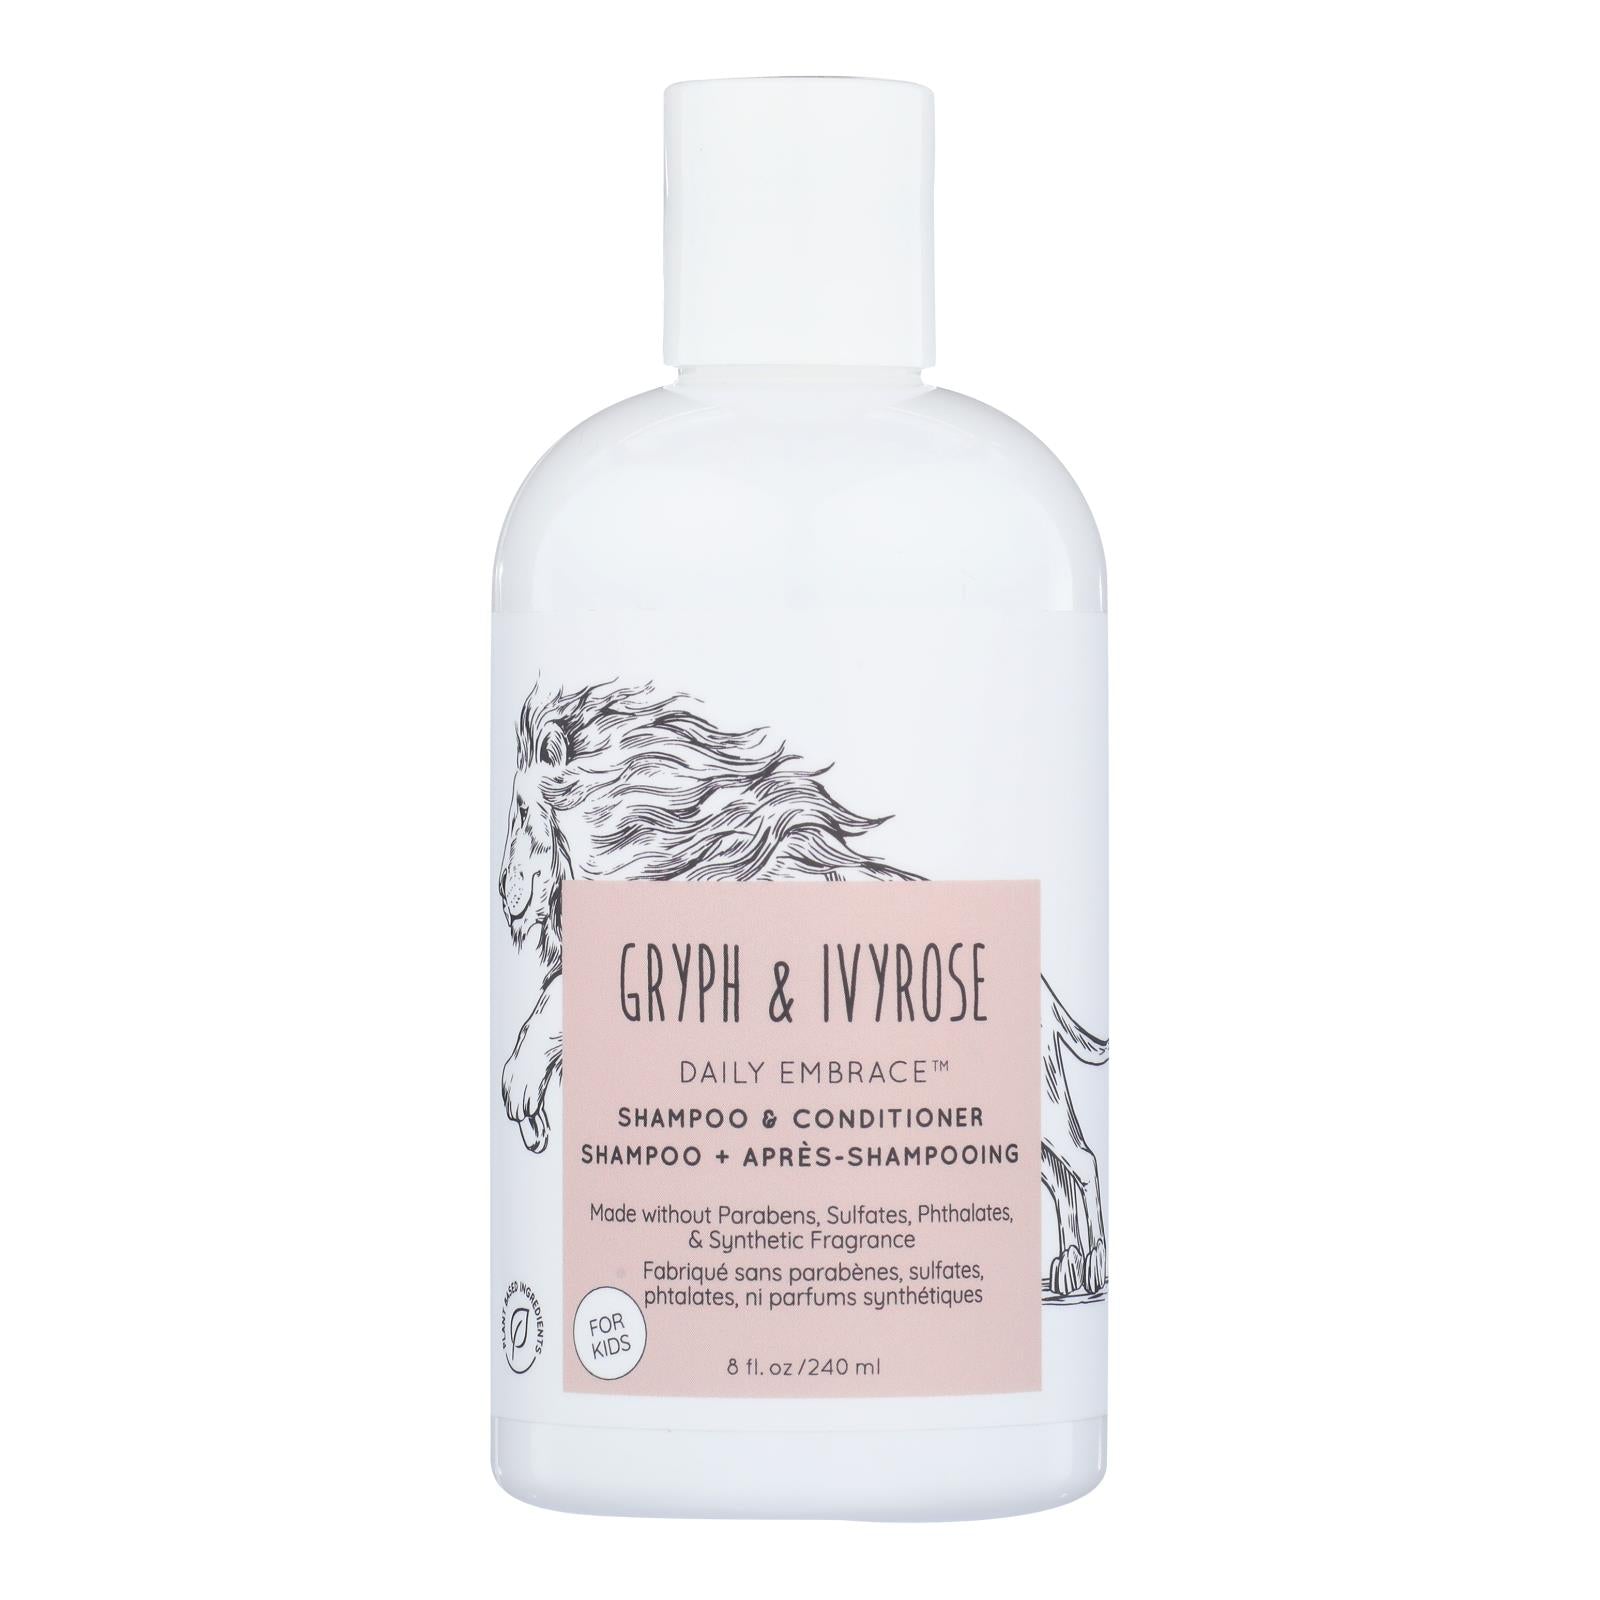 Gryph & Ivyrose - Shampoo and Conditioner Daily Embrace (8 Fl Oz)